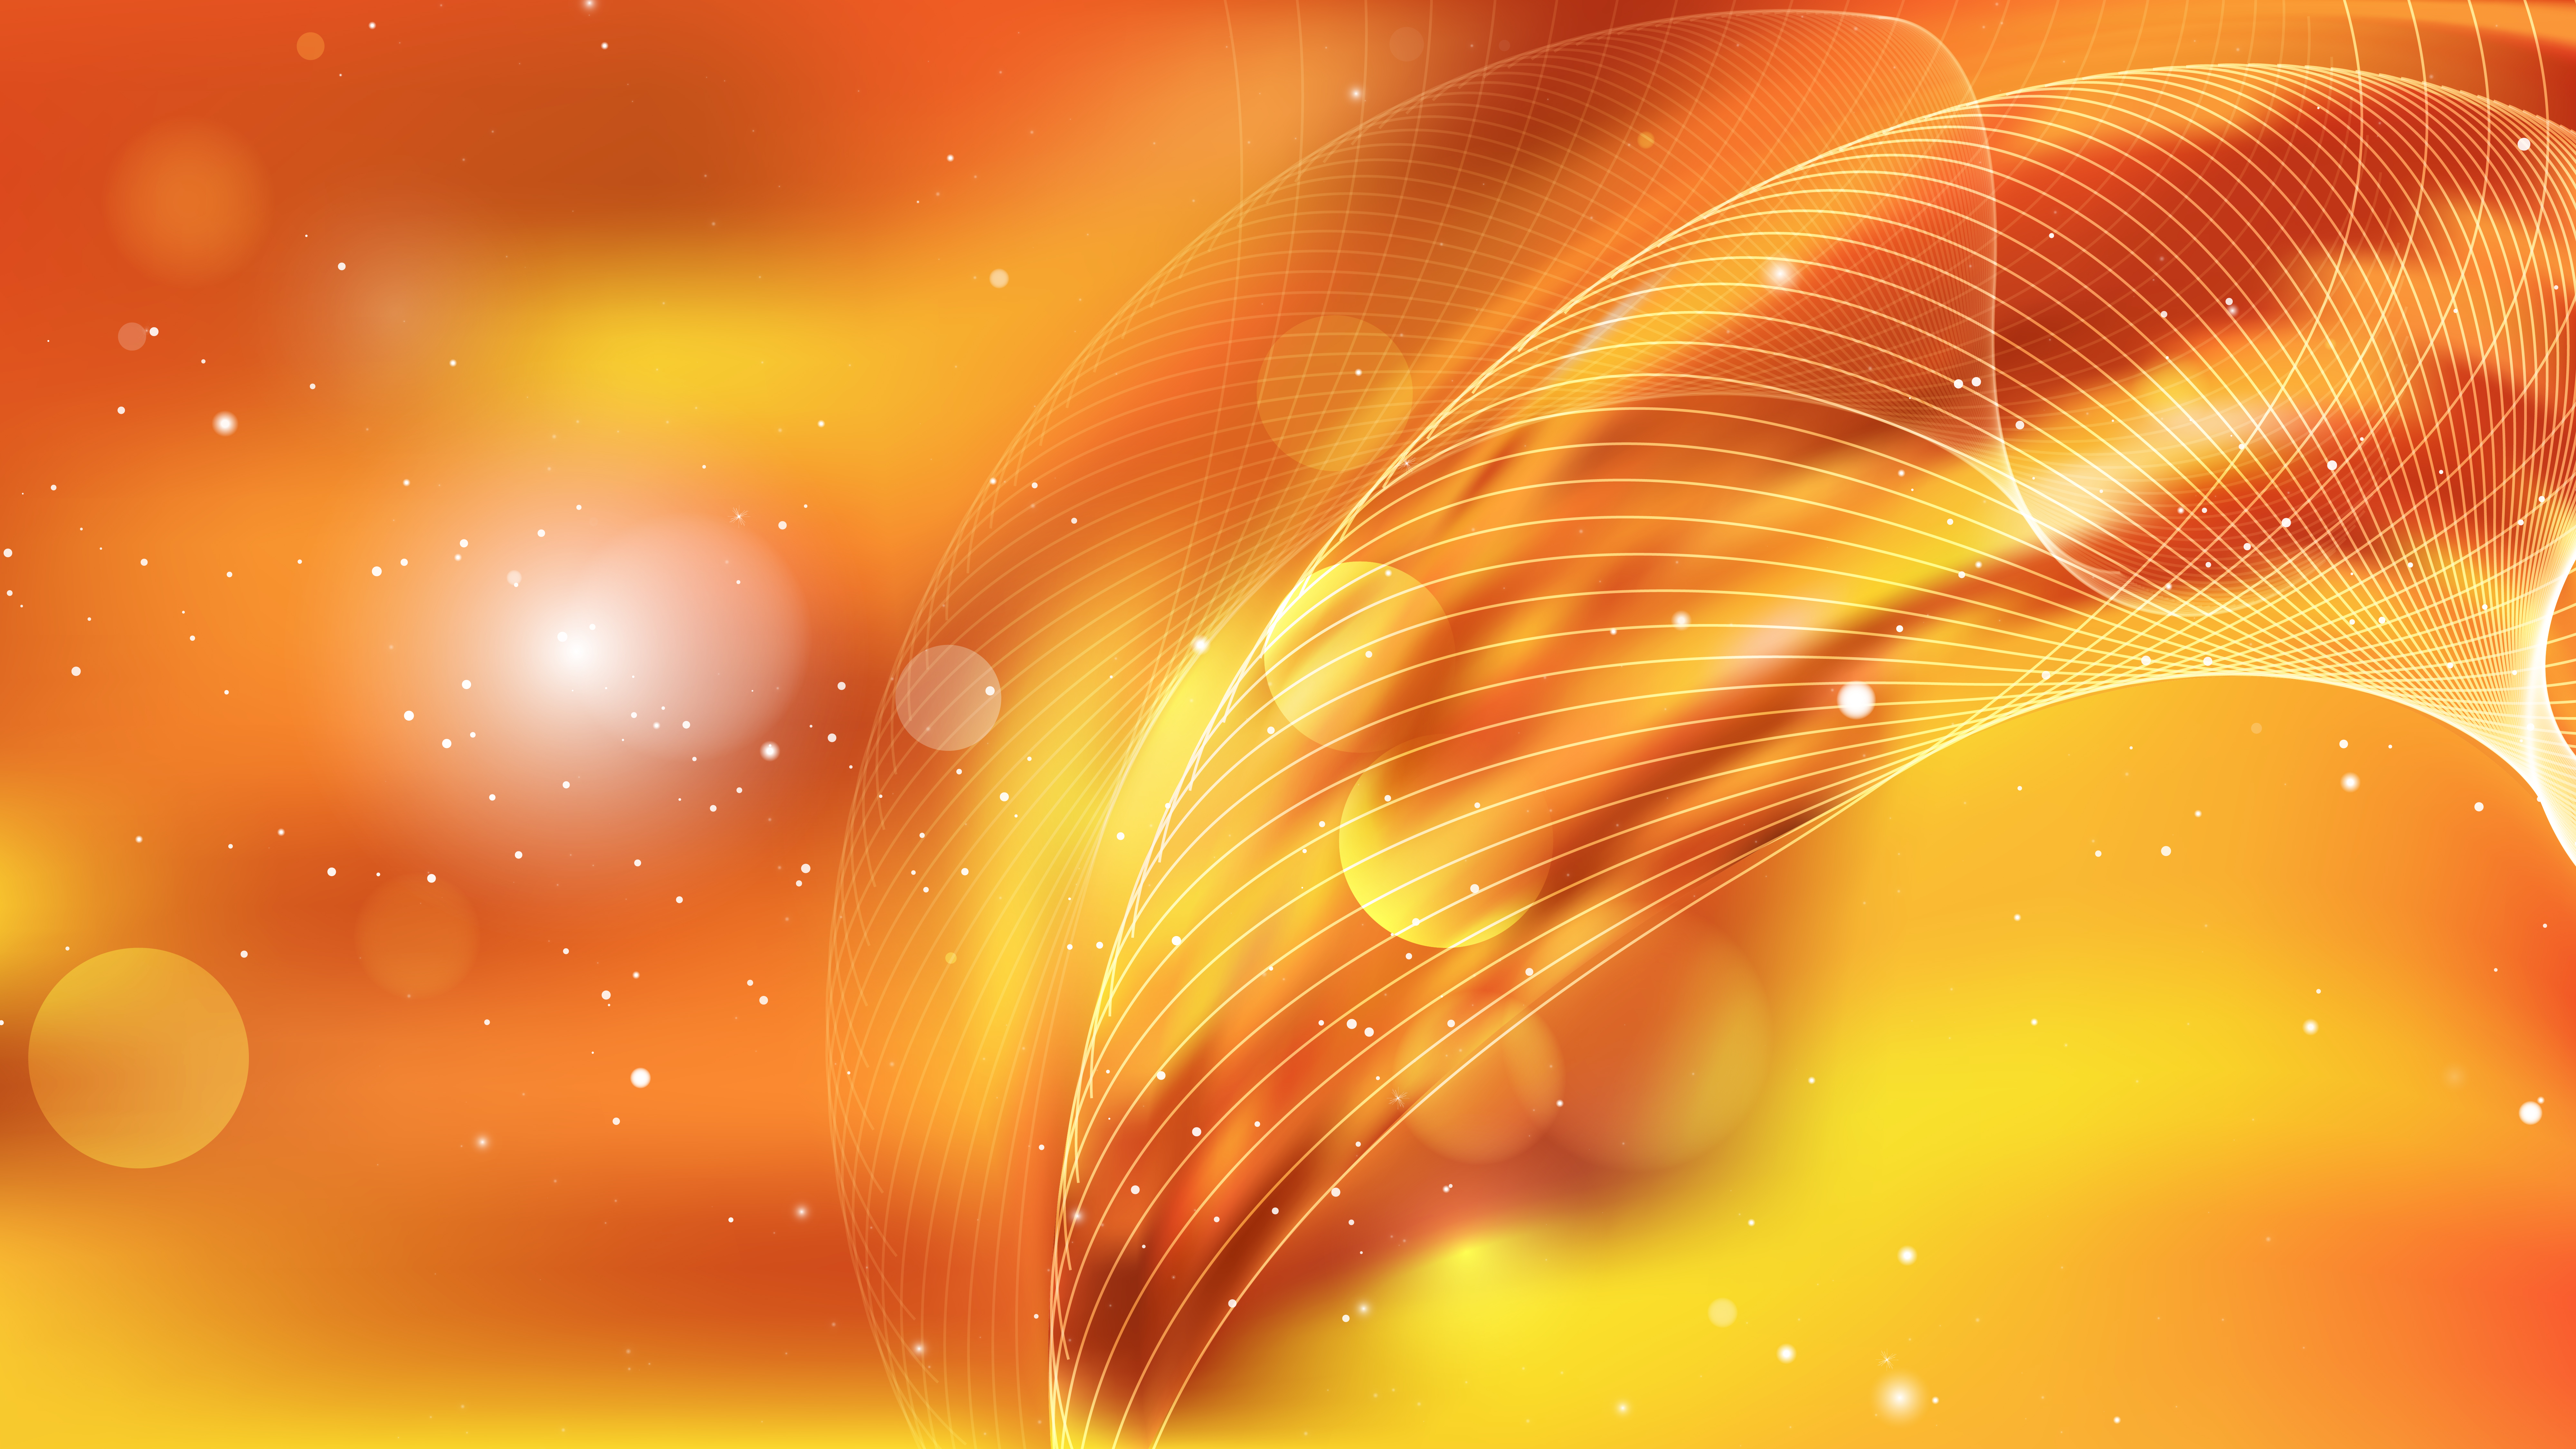 Free Abstract Orange and Yellow Background Vector